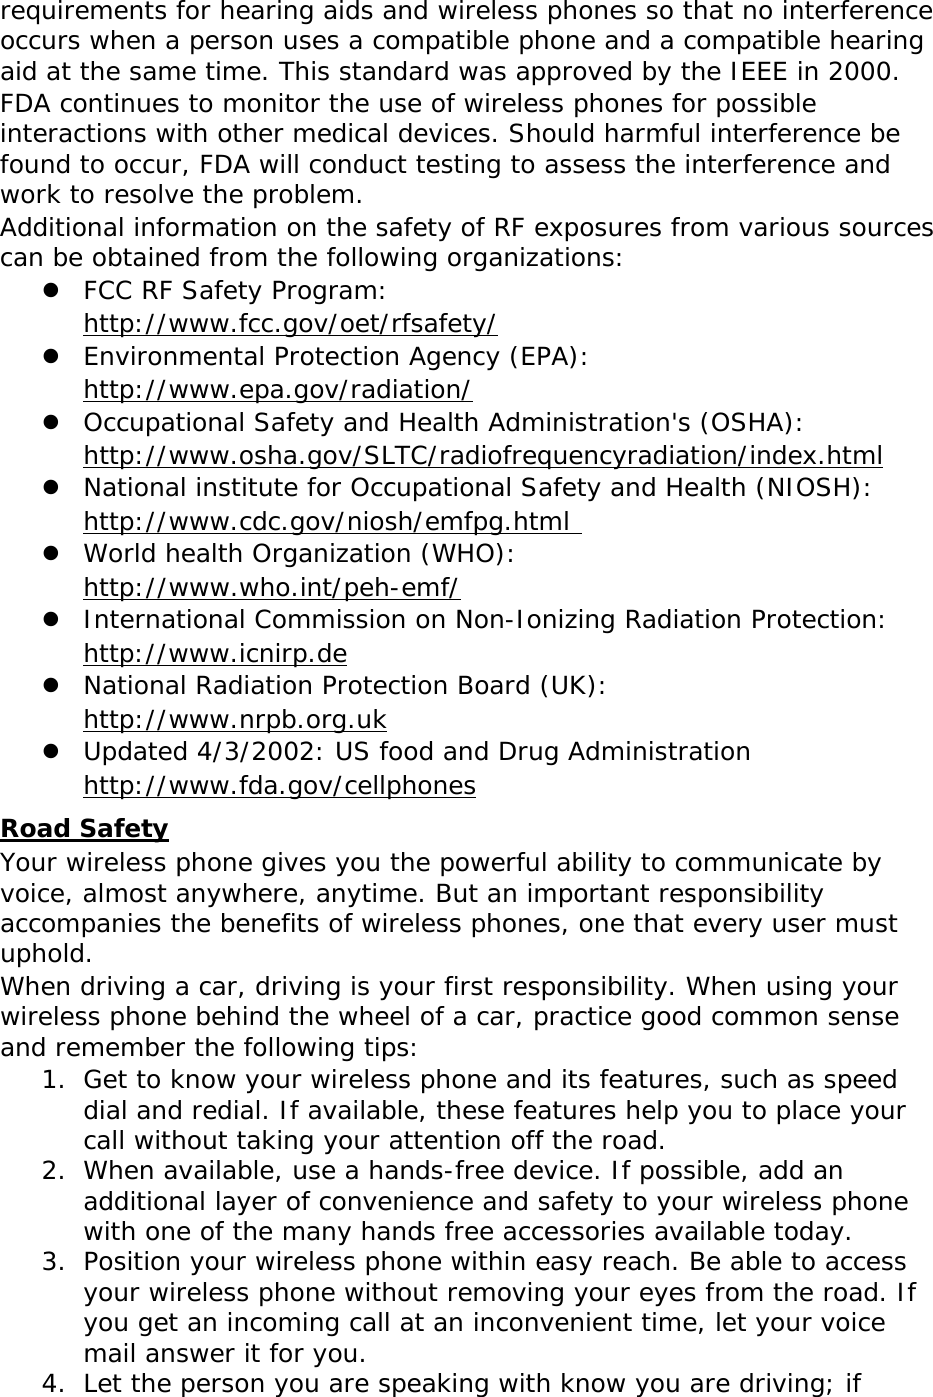 requirements for hearing aids and wireless phones so that no interference occurs when a person uses a compatible phone and a compatible hearing aid at the same time. This standard was approved by the IEEE in 2000. FDA continues to monitor the use of wireless phones for possible interactions with other medical devices. Should harmful interference be found to occur, FDA will conduct testing to assess the interference and work to resolve the problem. Additional information on the safety of RF exposures from various sources can be obtained from the following organizations:  FCC RF Safety Program:  http://www.fcc.gov/oet/rfsafety/  Environmental Protection Agency (EPA):  http://www.epa.gov/radiation/  Occupational Safety and Health Administration&apos;s (OSHA):        http://www.osha.gov/SLTC/radiofrequencyradiation/index.html  National institute for Occupational Safety and Health (NIOSH):  http://www.cdc.gov/niosh/emfpg.html   World health Organization (WHO):  http://www.who.int/peh-emf/  International Commission on Non-Ionizing Radiation Protection:  http://www.icnirp.de  National Radiation Protection Board (UK):  http://www.nrpb.org.uk  Updated 4/3/2002: US food and Drug Administration  http://www.fda.gov/cellphones Road Safety Your wireless phone gives you the powerful ability to communicate by voice, almost anywhere, anytime. But an important responsibility accompanies the benefits of wireless phones, one that every user must uphold. When driving a car, driving is your first responsibility. When using your wireless phone behind the wheel of a car, practice good common sense and remember the following tips: 1. Get to know your wireless phone and its features, such as speed dial and redial. If available, these features help you to place your call without taking your attention off the road. 2. When available, use a hands-free device. If possible, add an additional layer of convenience and safety to your wireless phone with one of the many hands free accessories available today. 3. Position your wireless phone within easy reach. Be able to access your wireless phone without removing your eyes from the road. If you get an incoming call at an inconvenient time, let your voice mail answer it for you. 4. Let the person you are speaking with know you are driving; if 